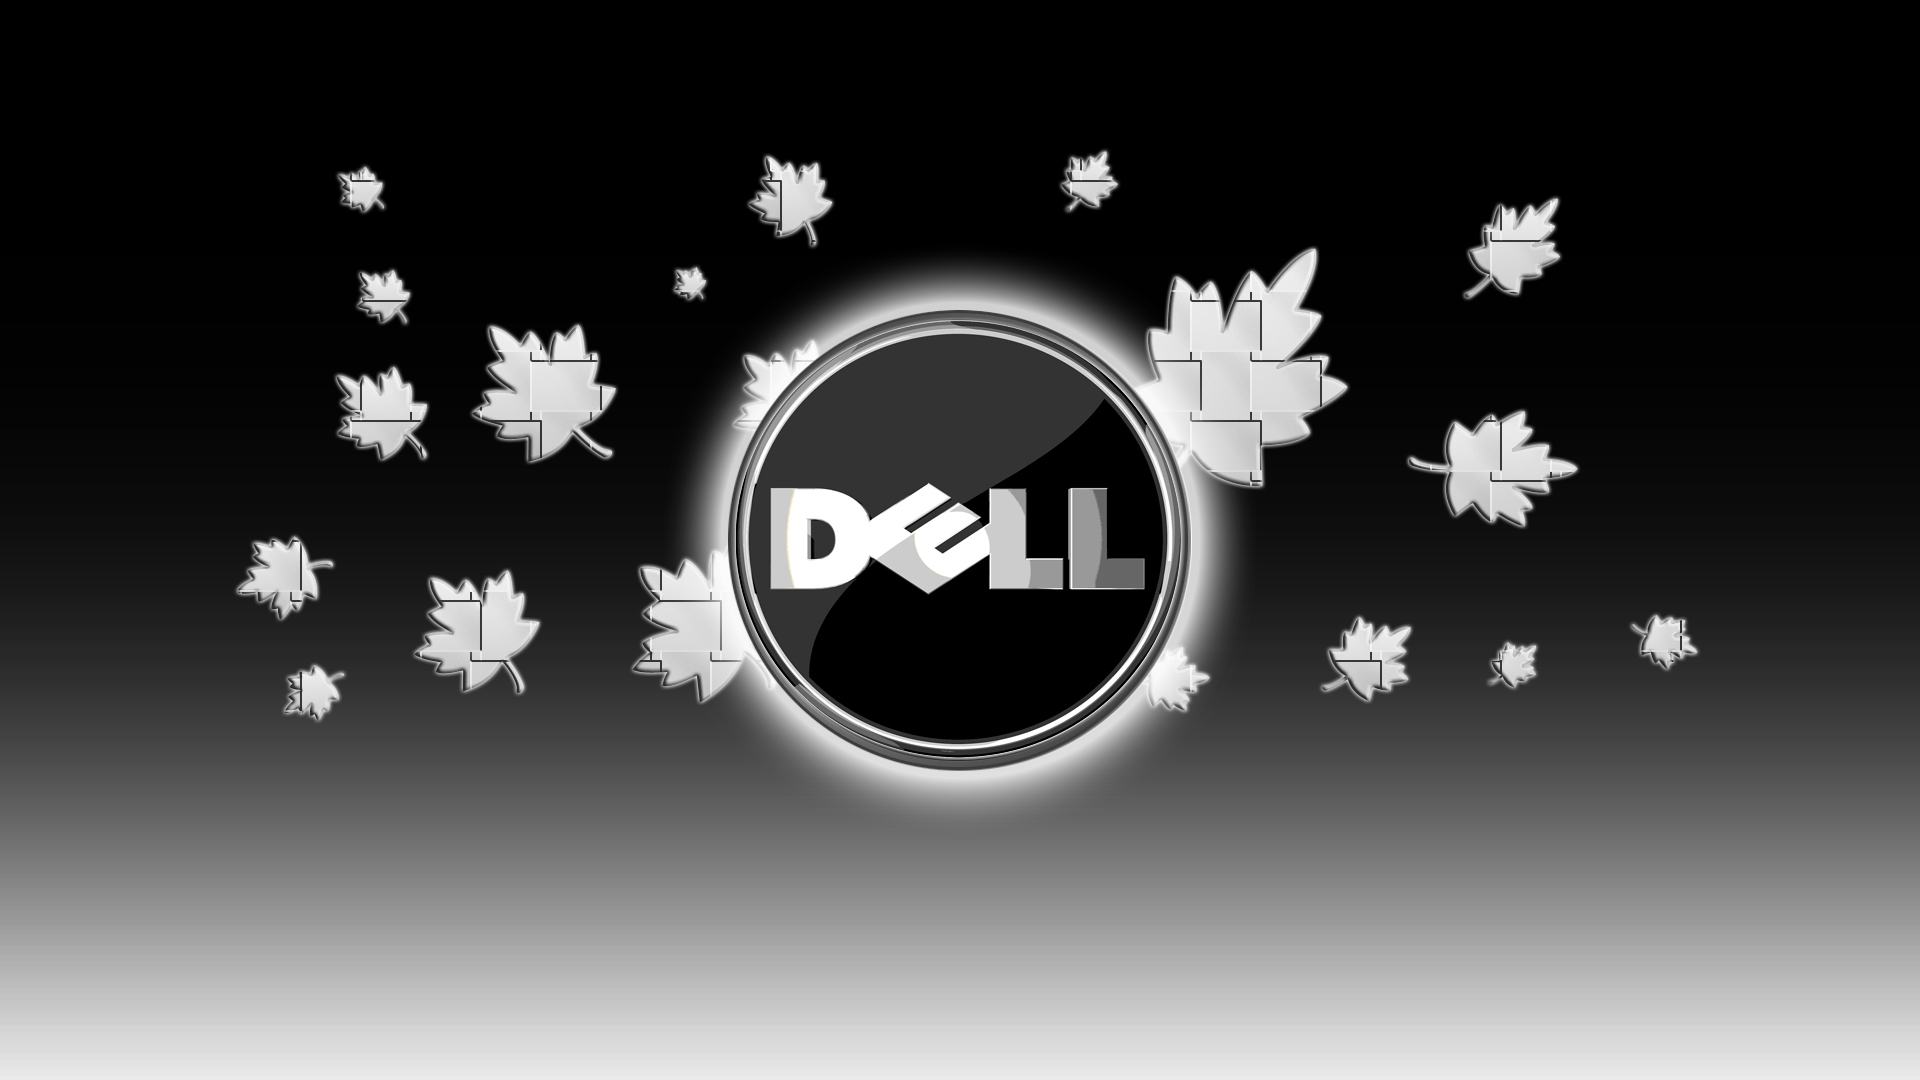 Dell Wallpapers 25 19 X 1080